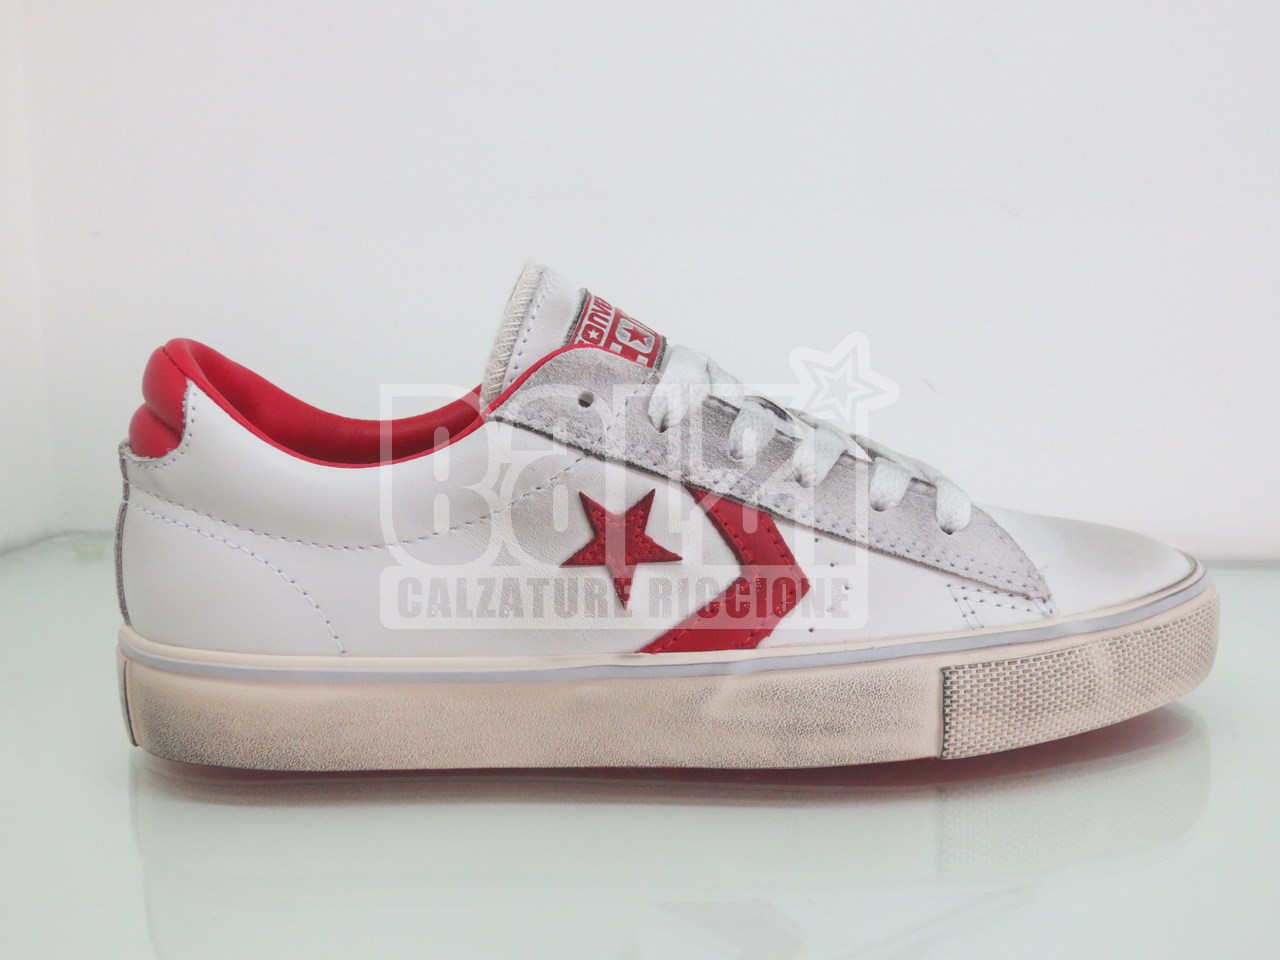 converse pro leather strass